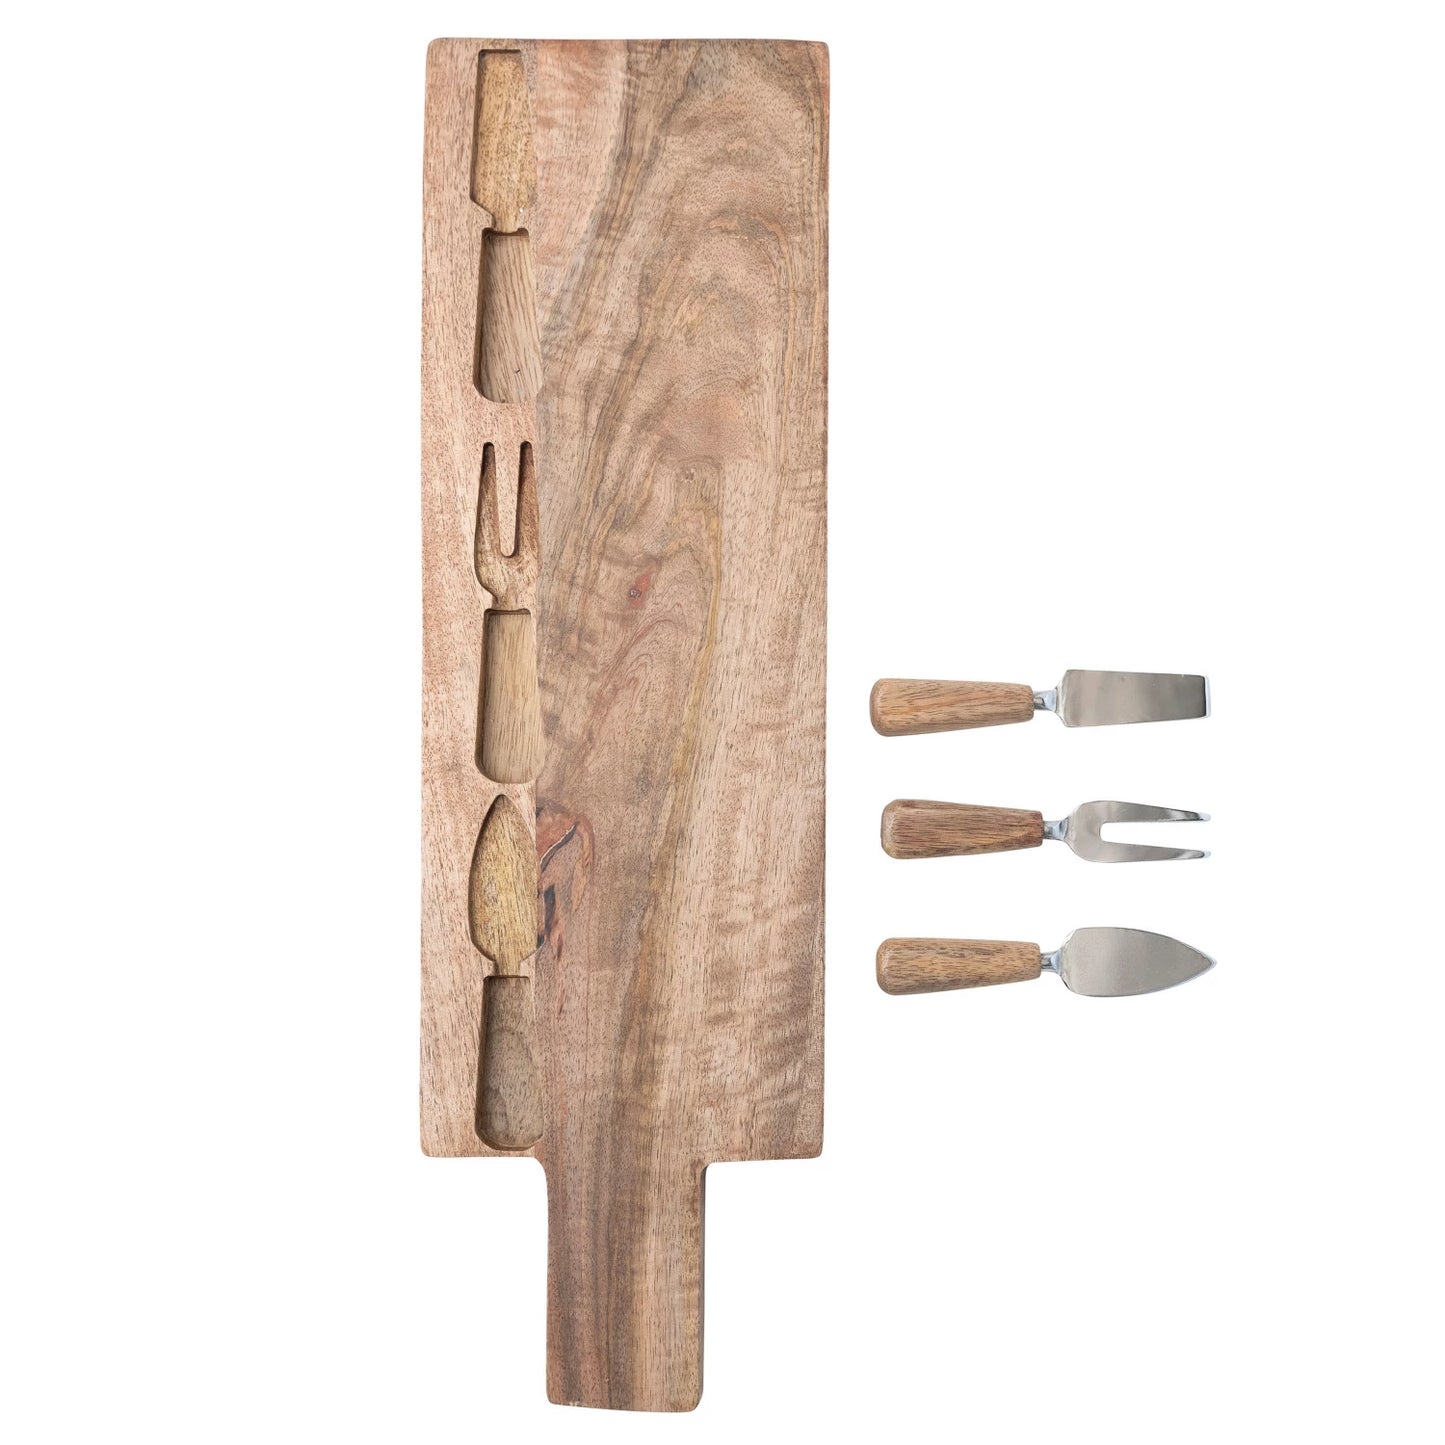 Mango Wood Cheese Board with Utensils